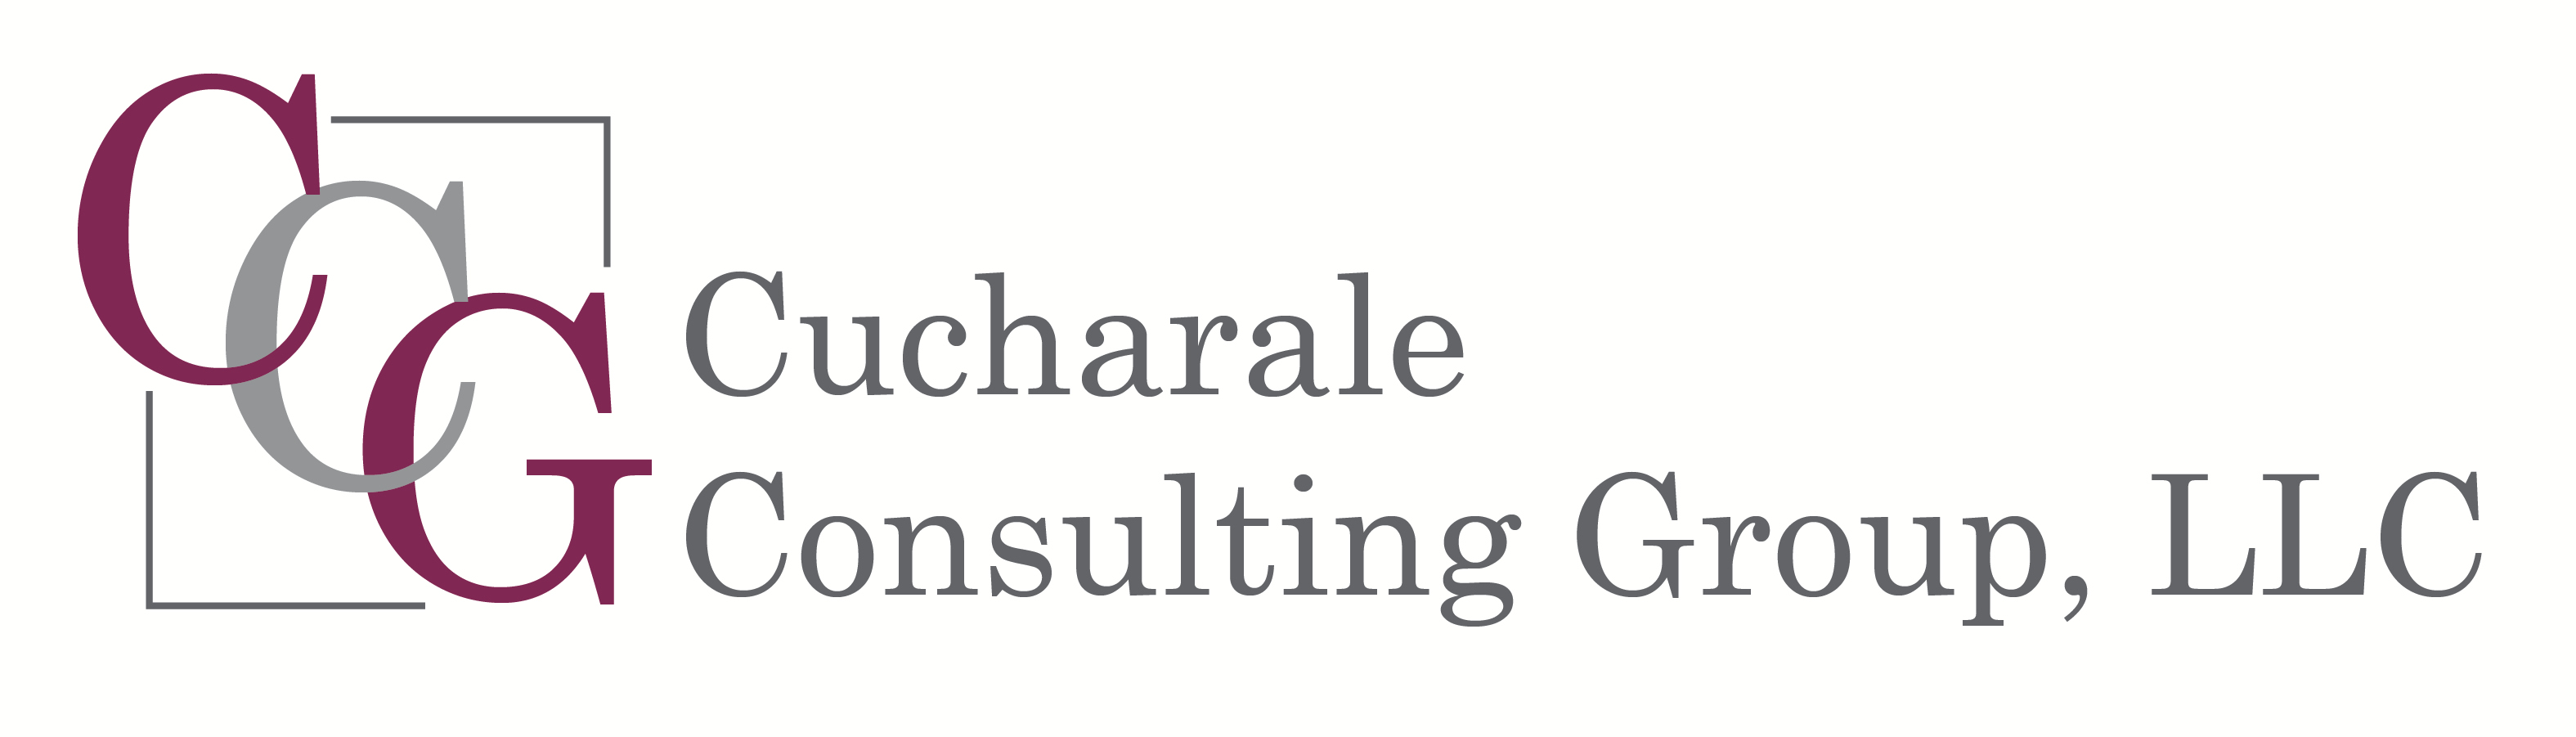 cucharale-consulting-group-img